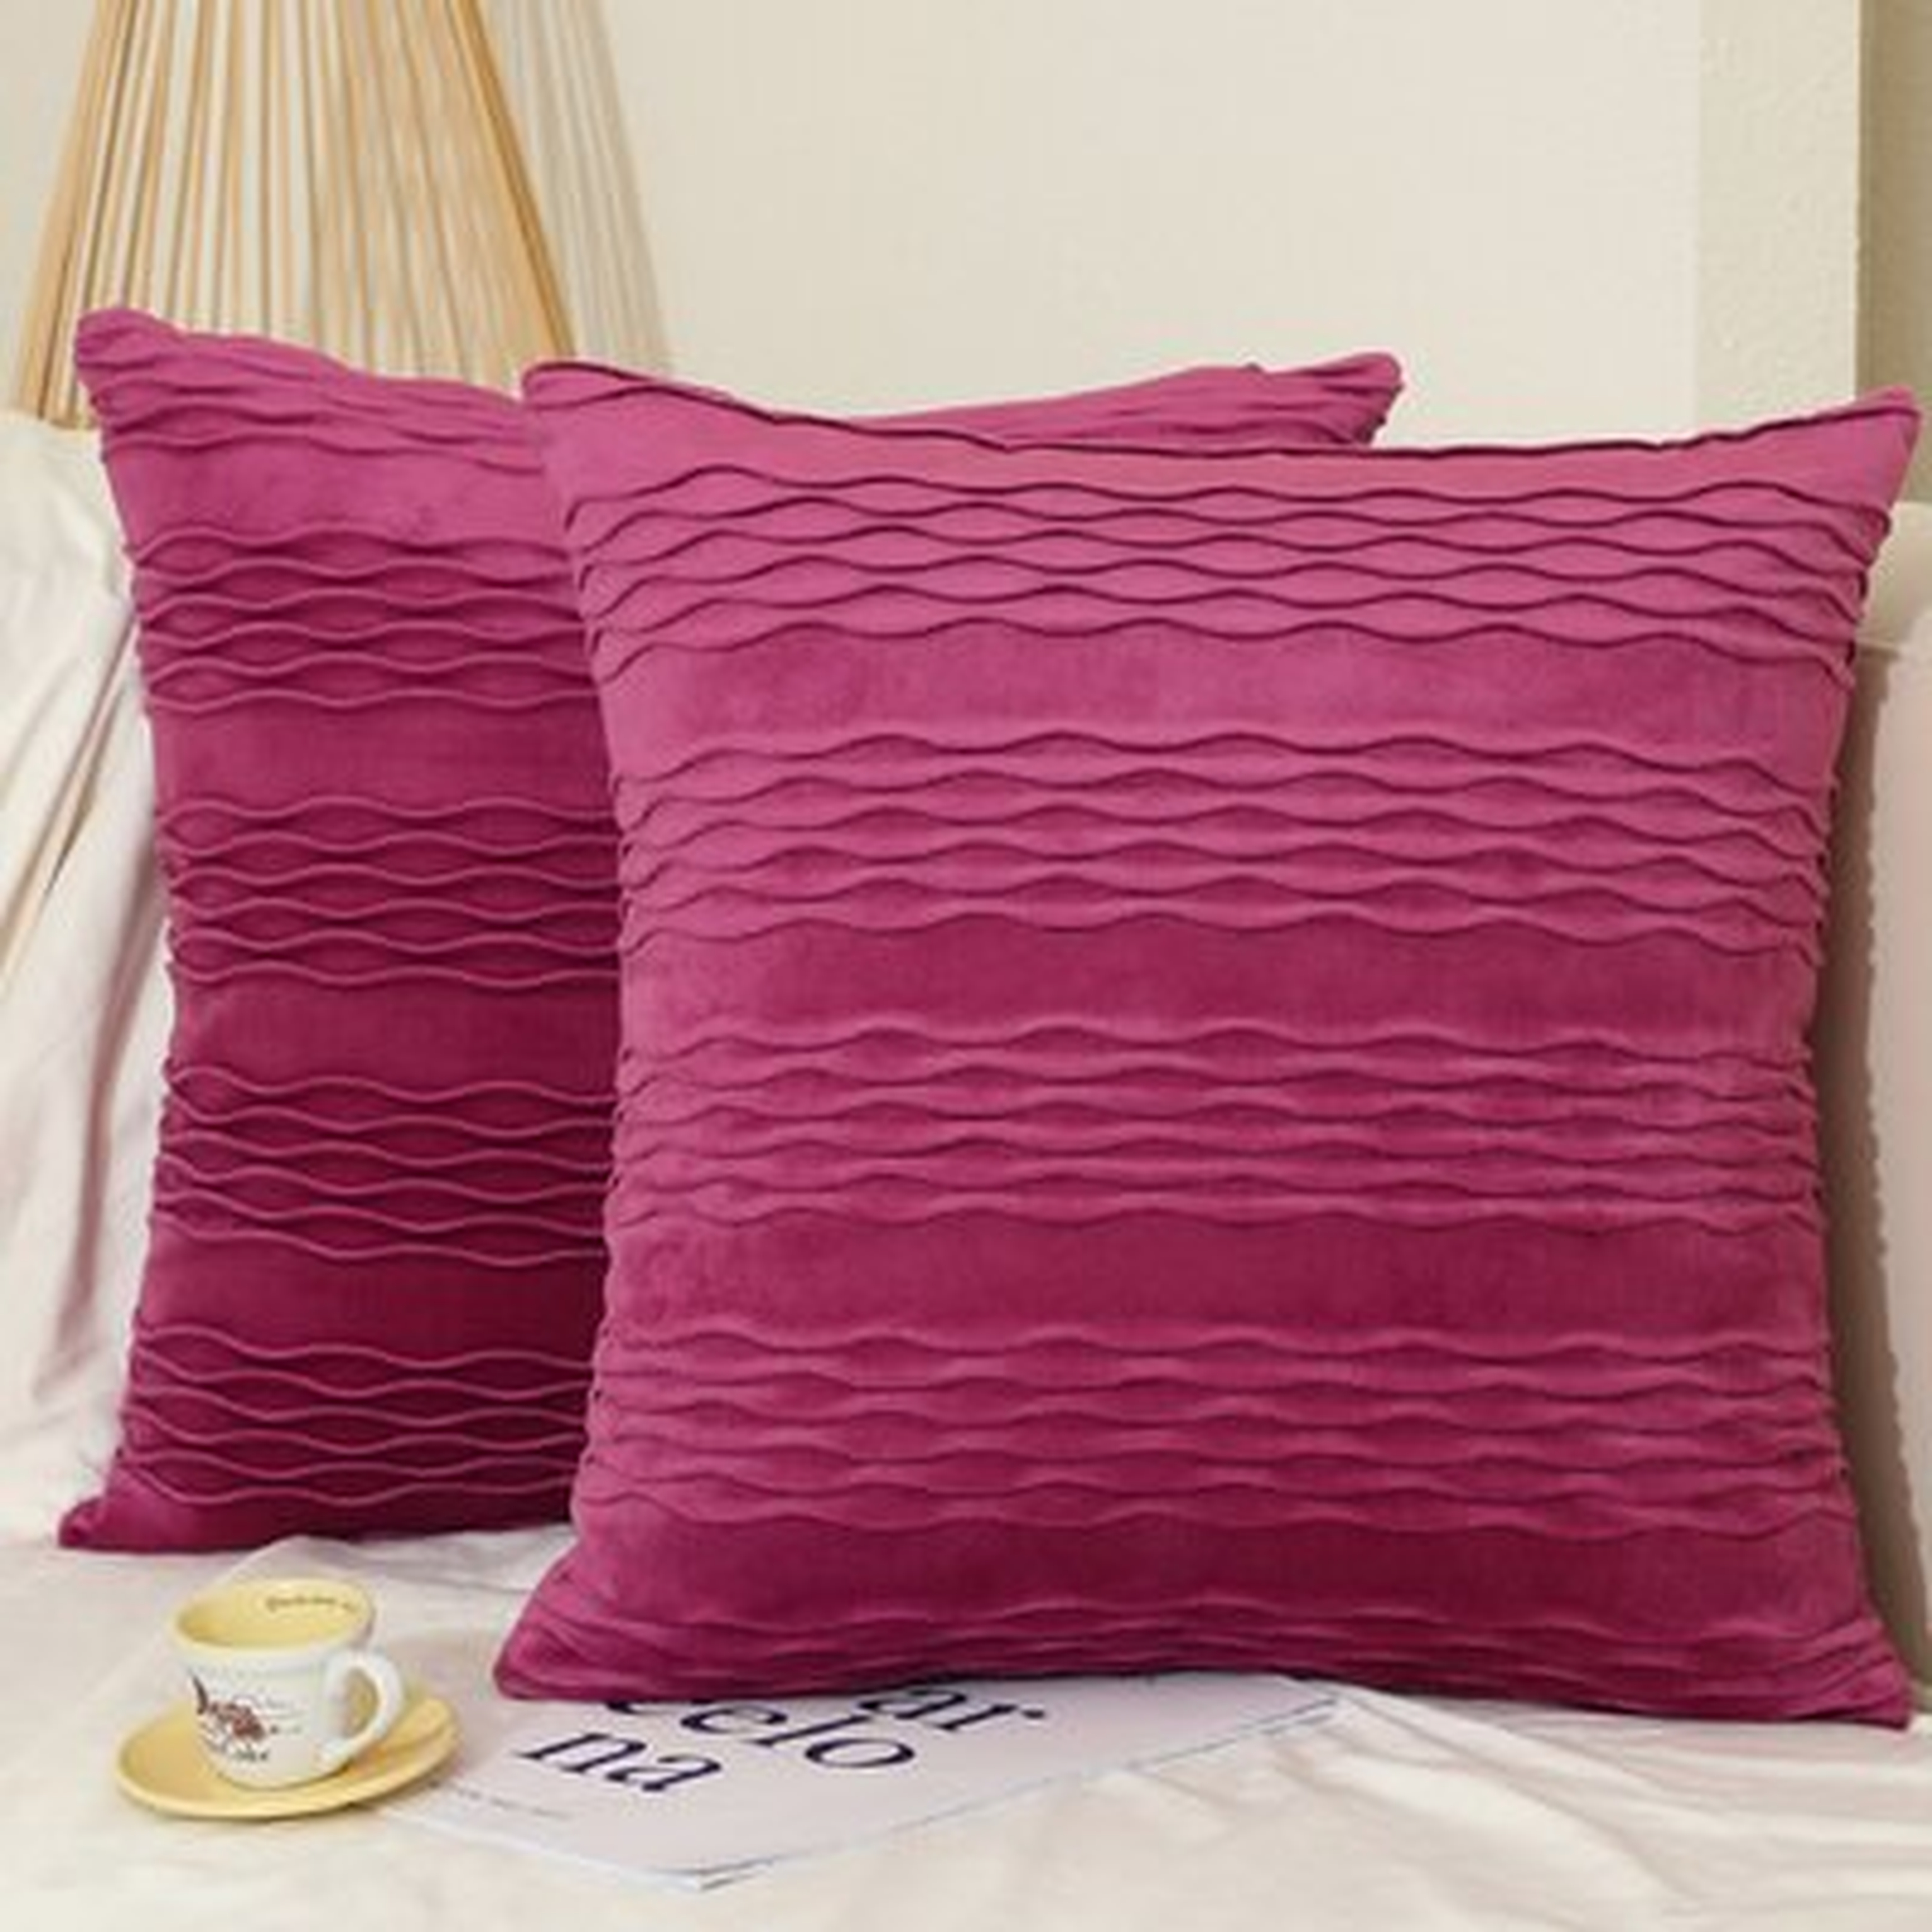 Pannell Square Pillow Cover set of 2 - Wayfair